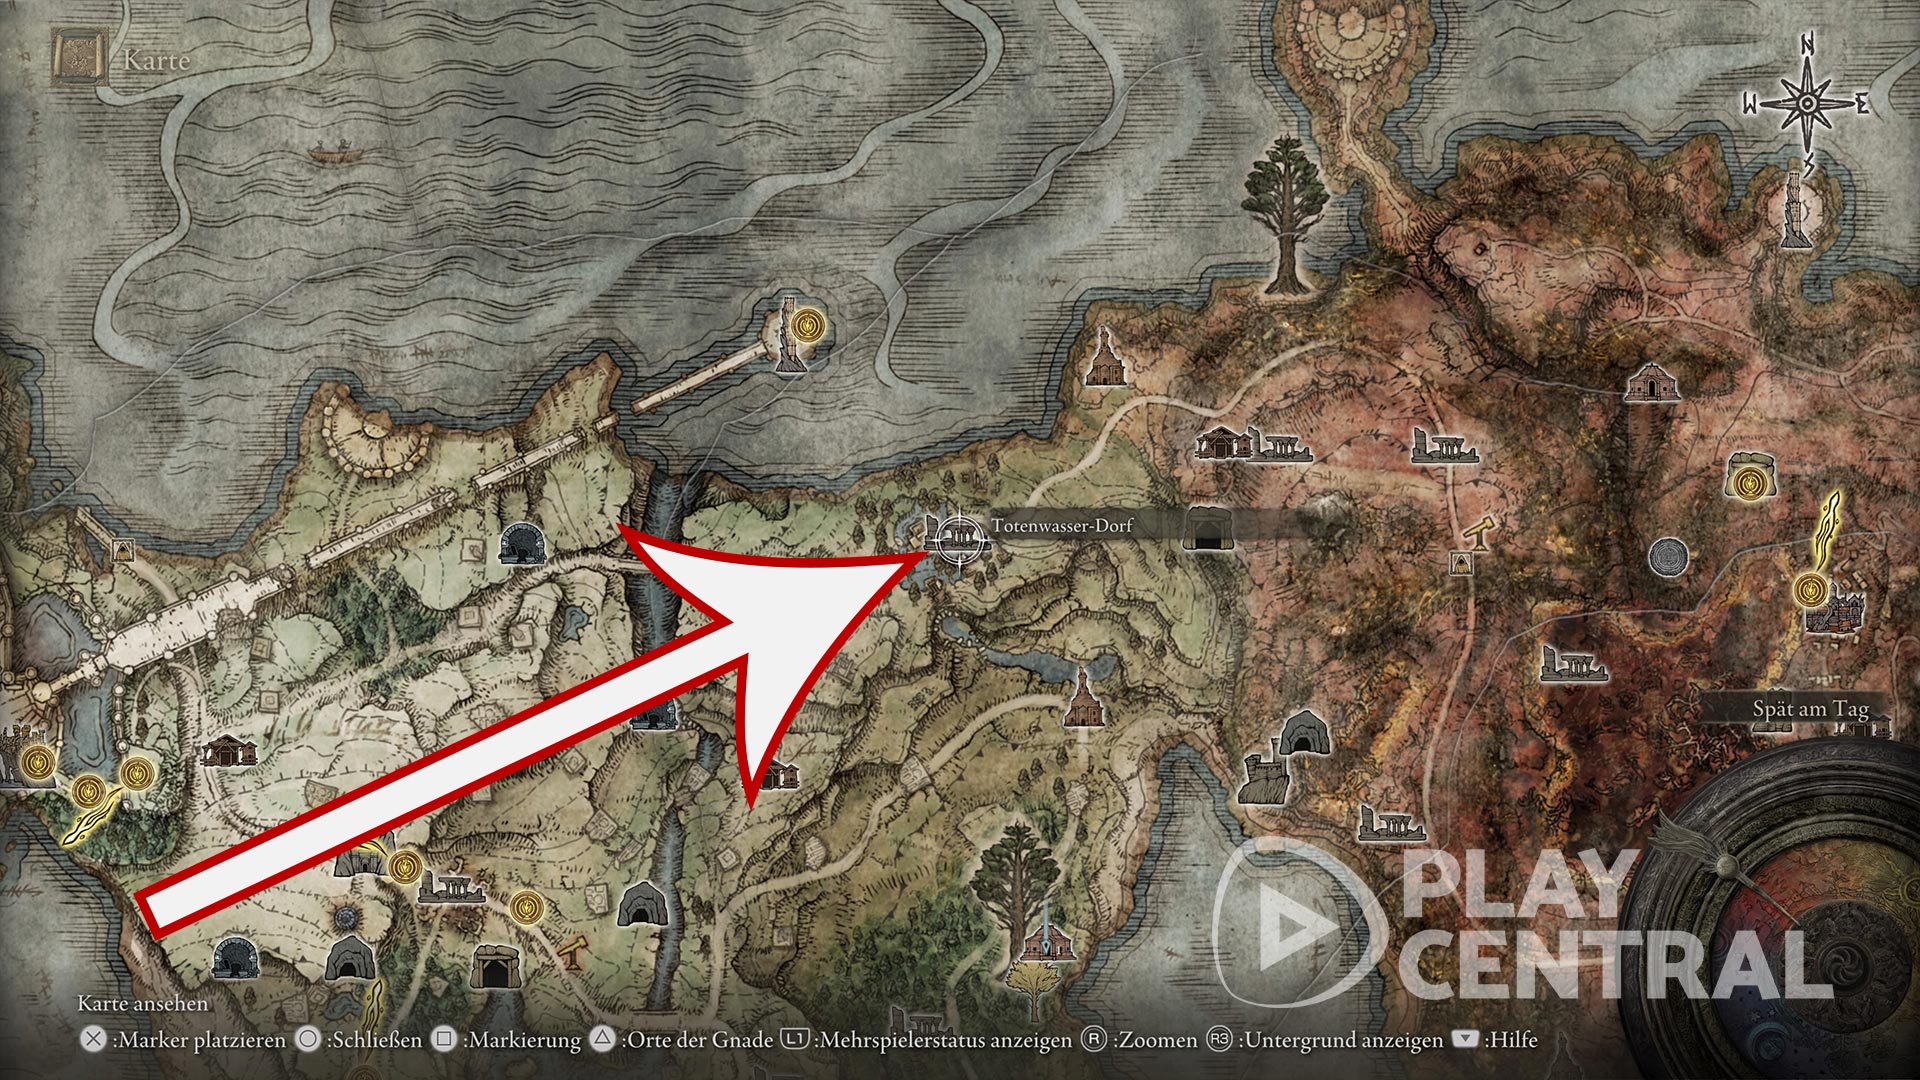 Elden Ring: How To Find D, Hunter Of The Dead And Complete His Questline Guide